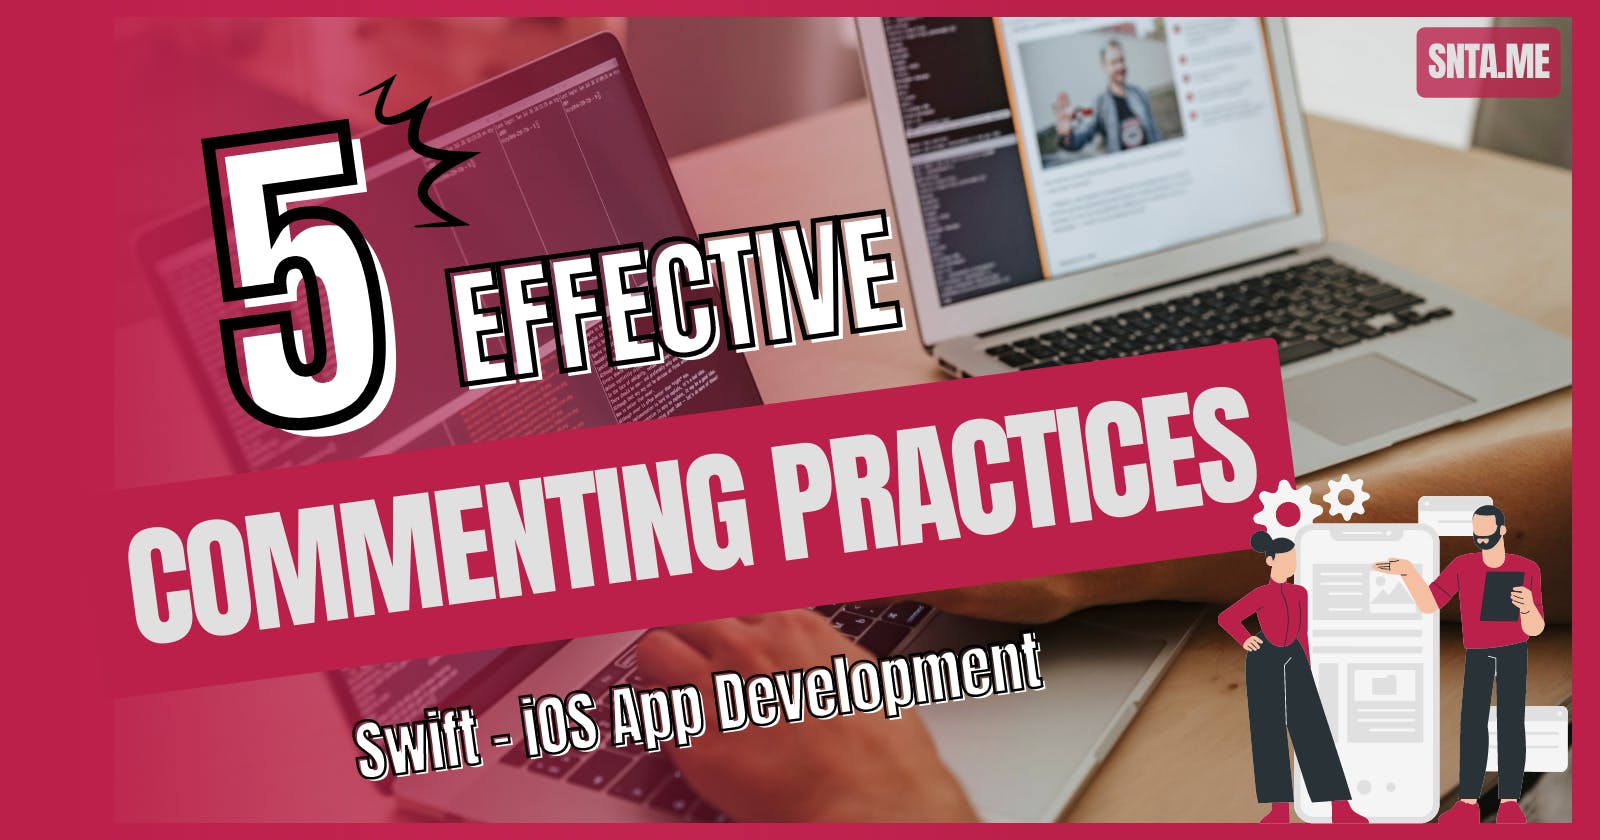 Five Effective Commenting Practices for Swift-iOS